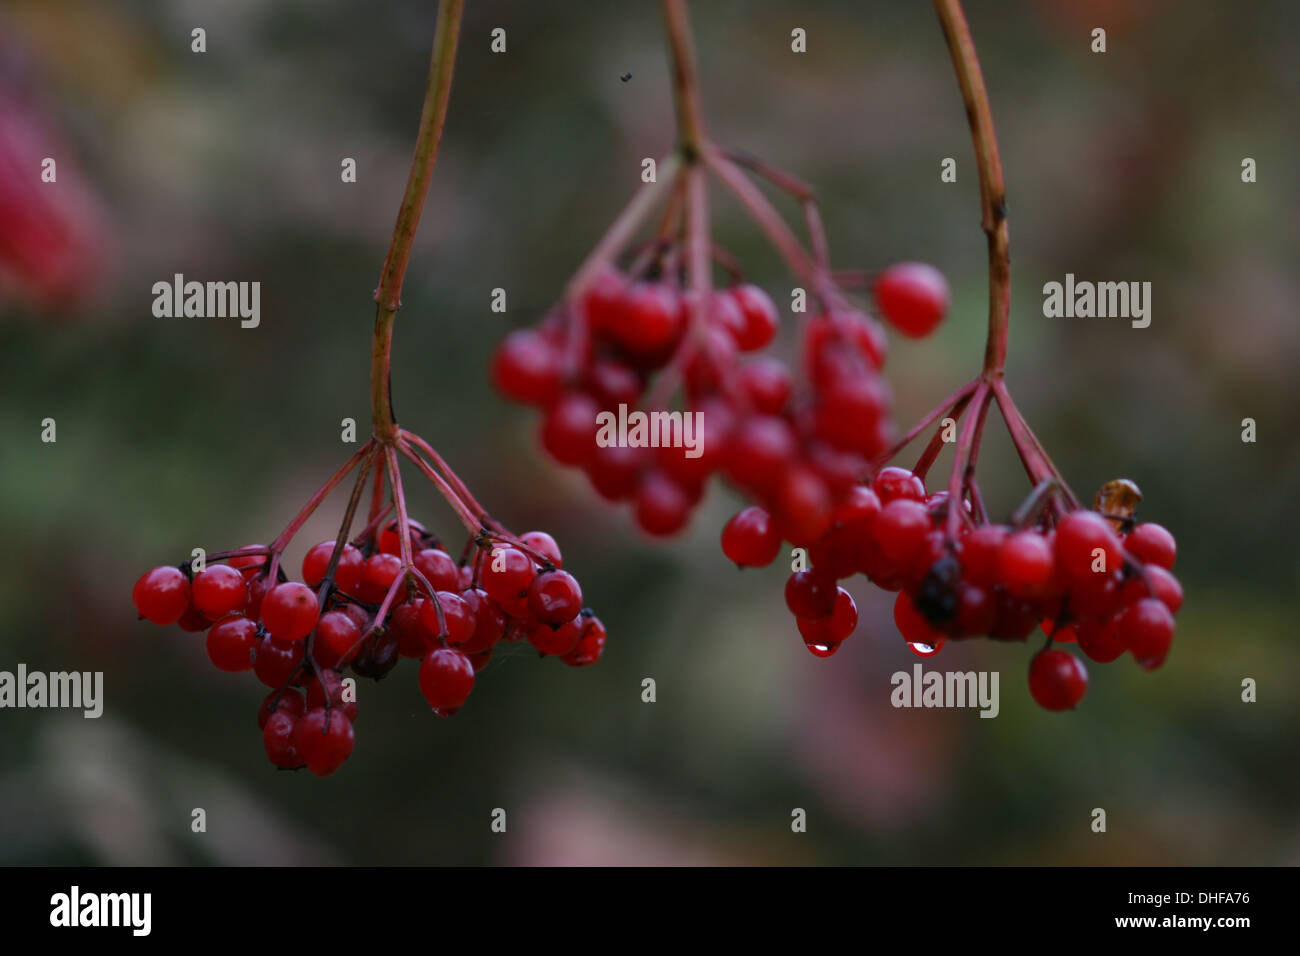 Guelder rose, Viburnum opulus, berries in autumn with droplets of water Stock Photo